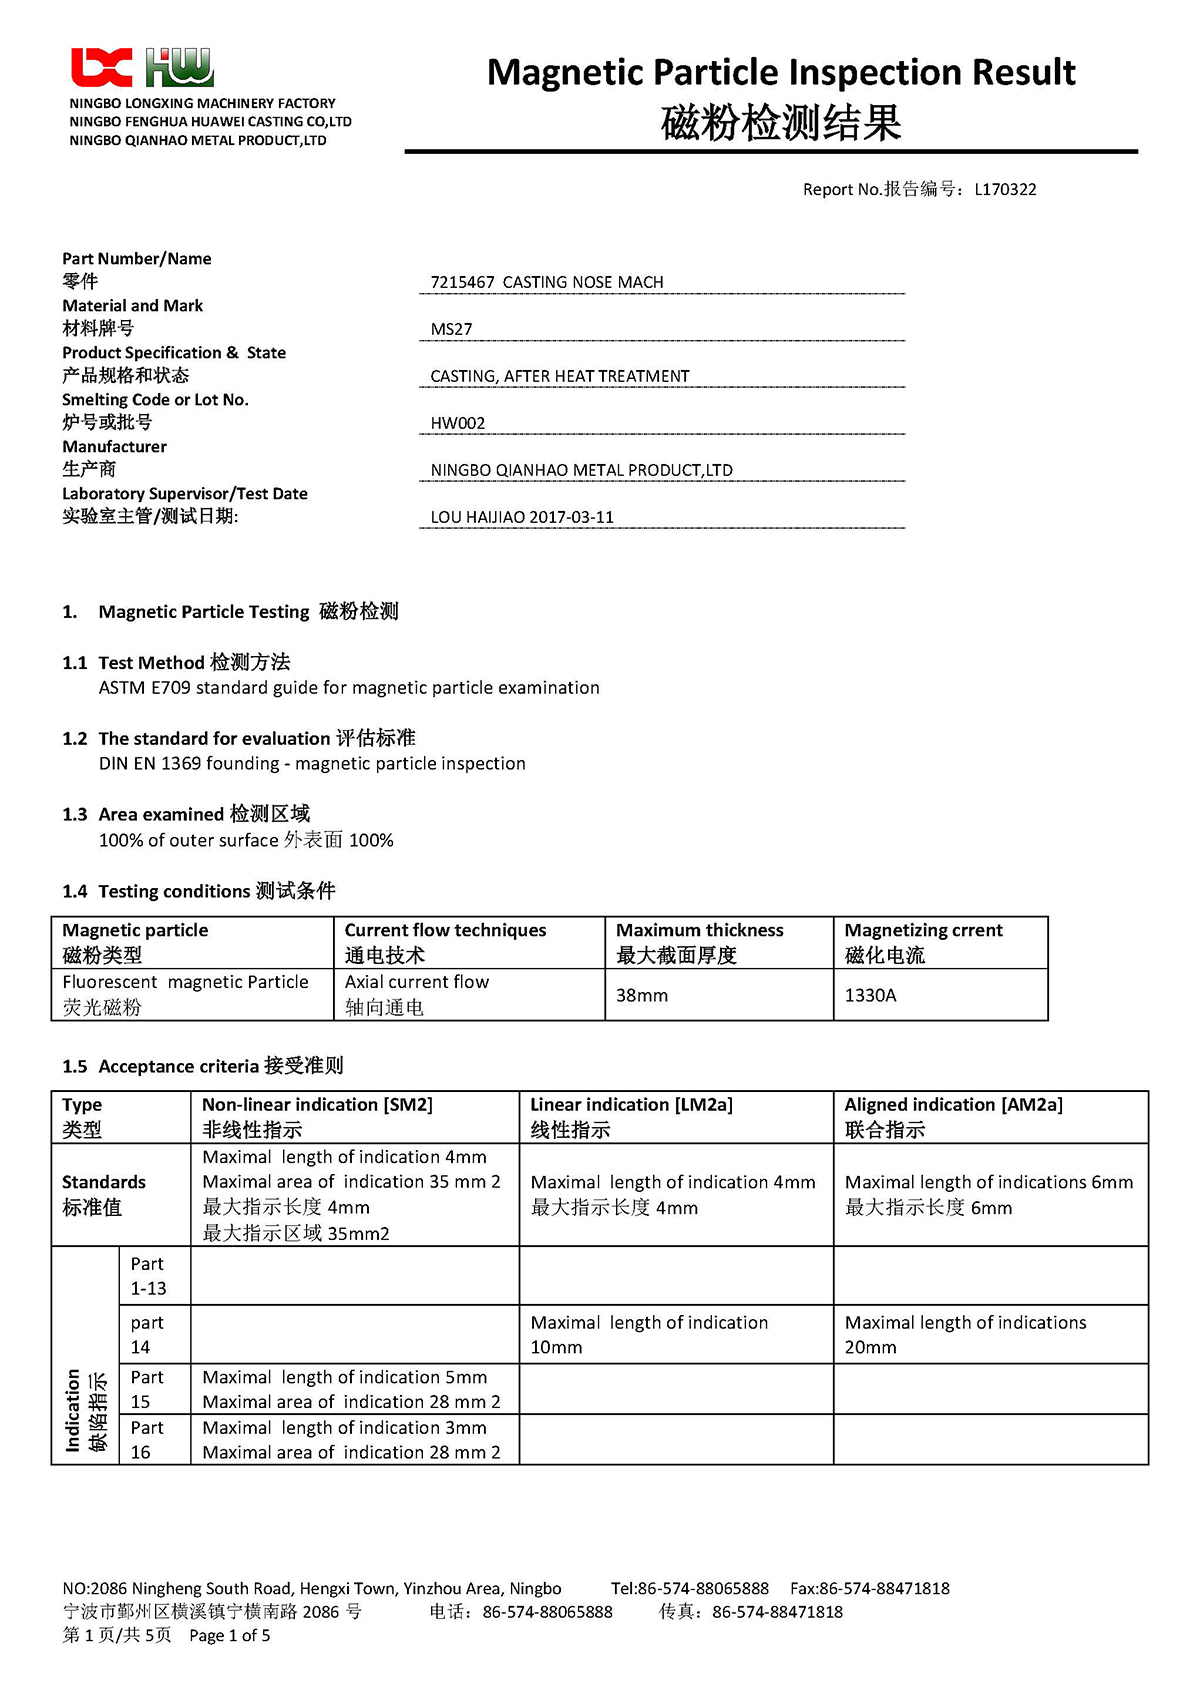 Magnetic Particle Inspection Report(图1)